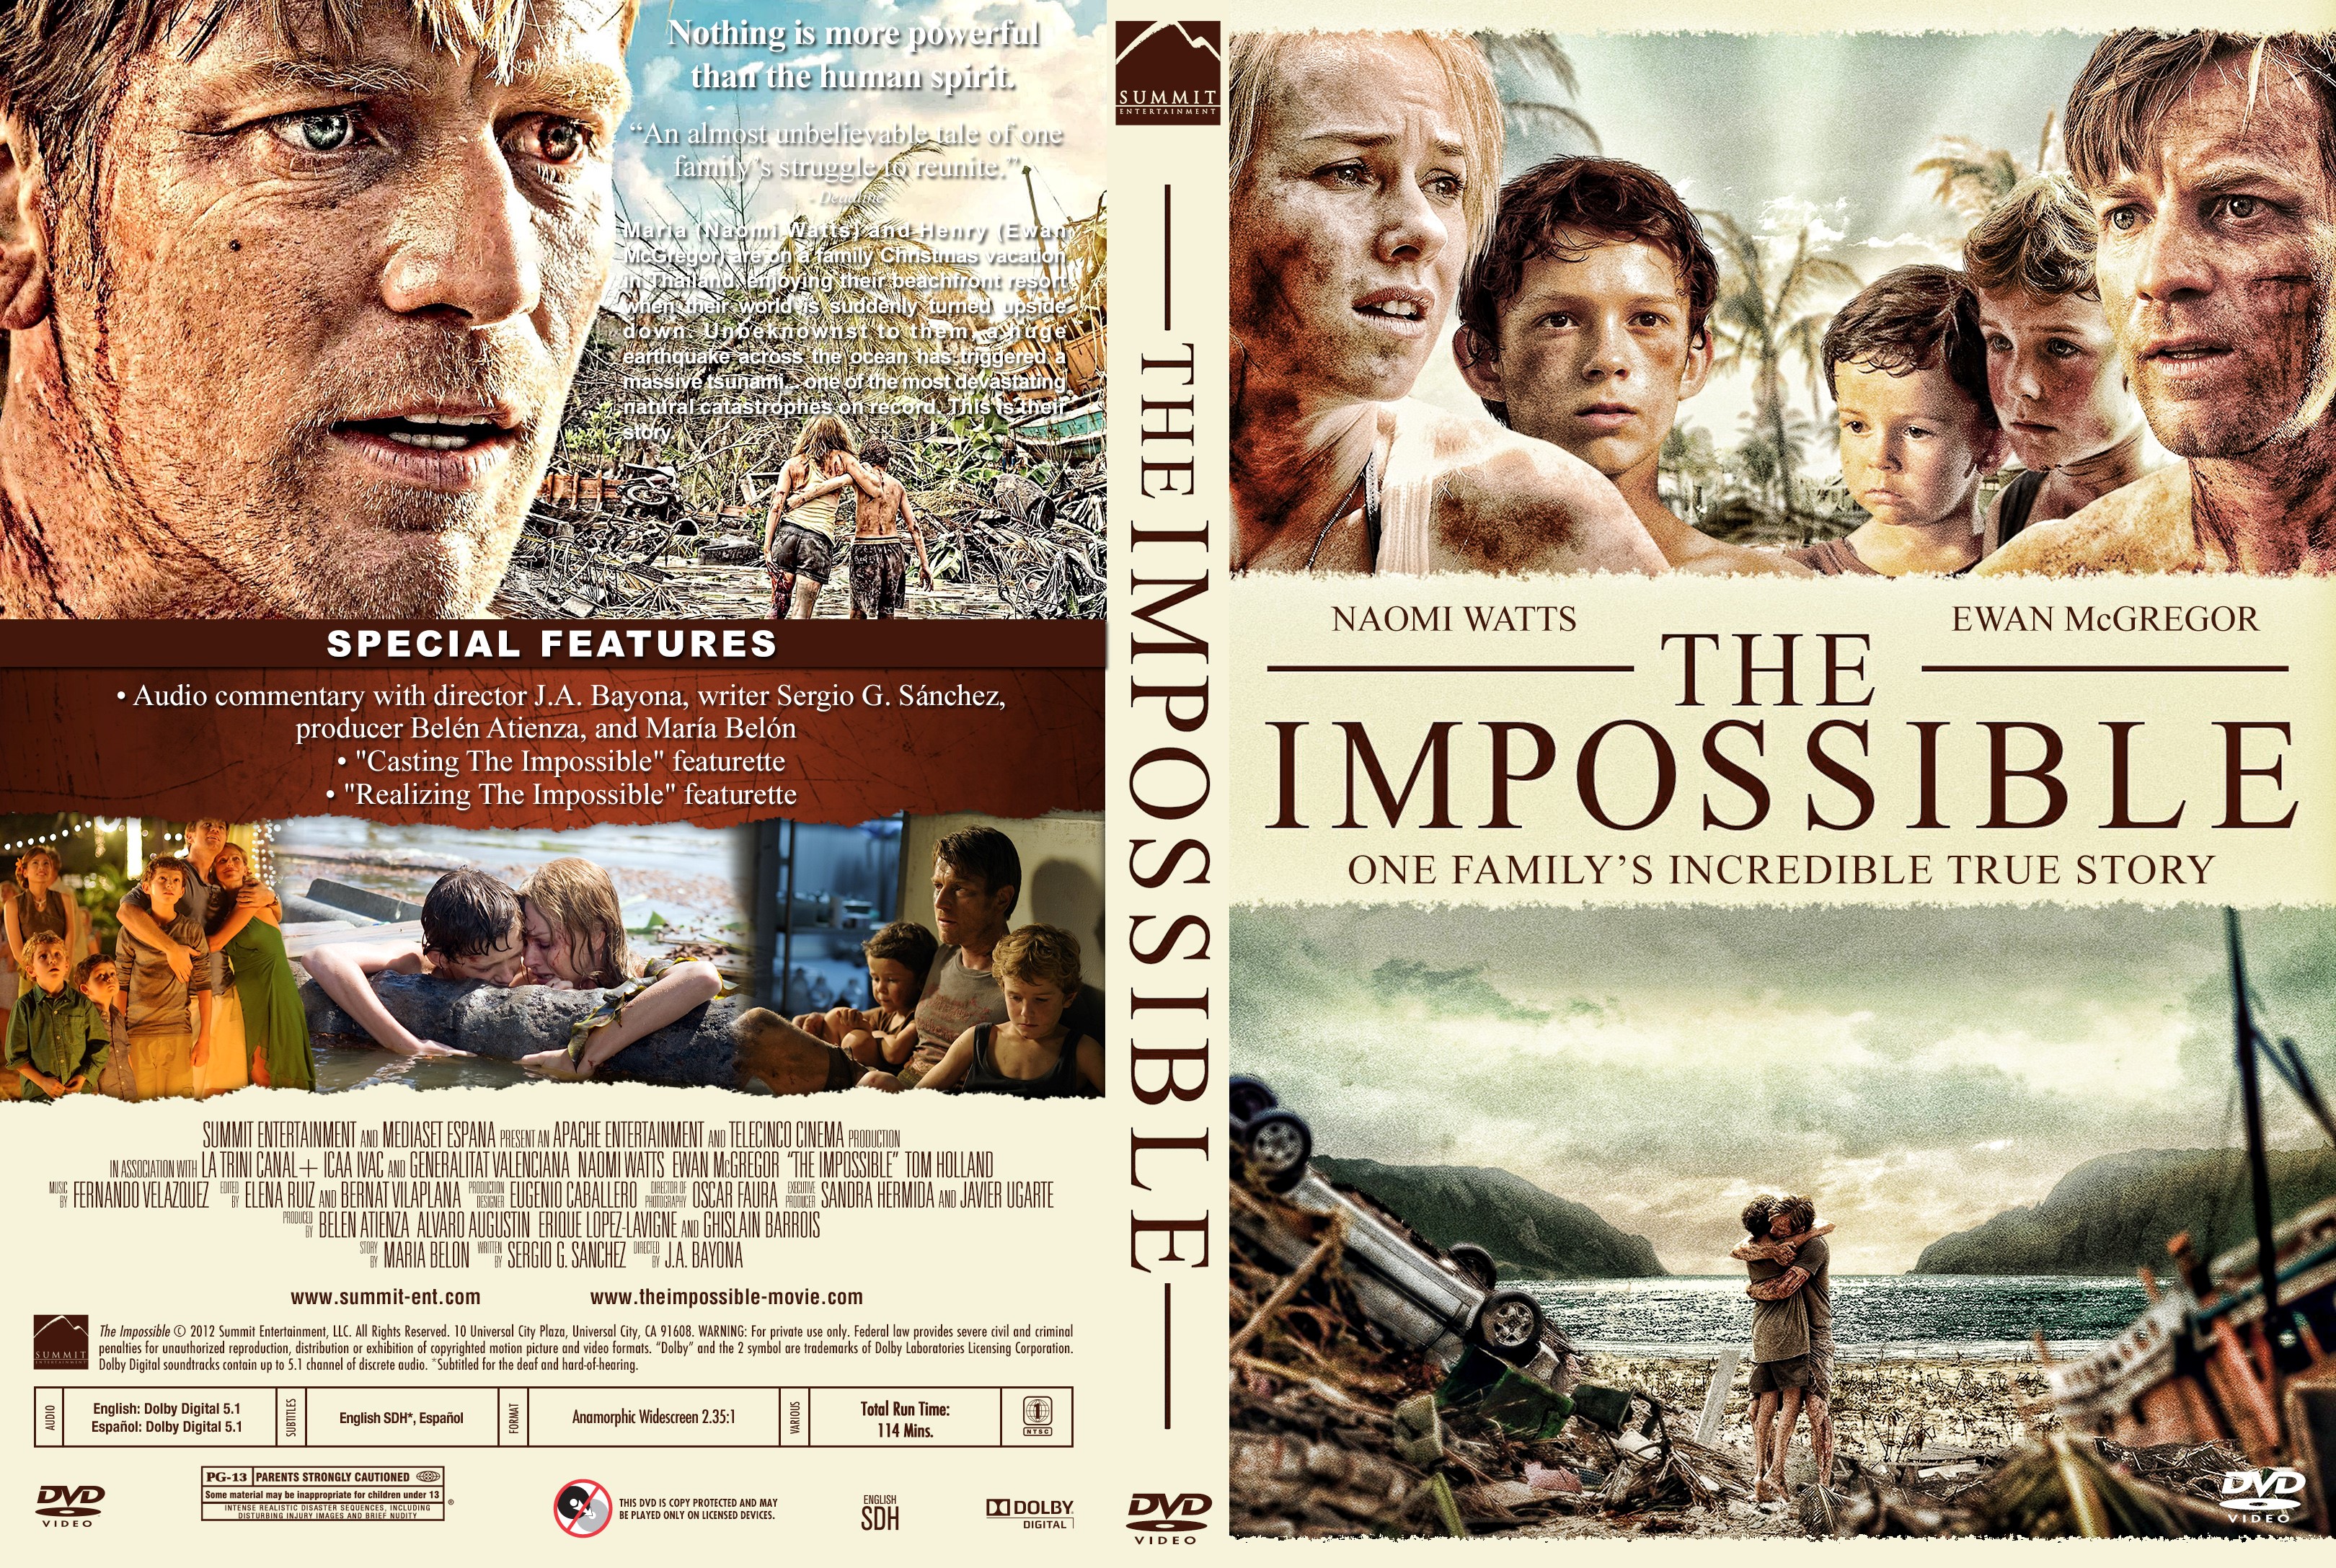 The Impossible DVD Cover | Cover Addict - Free DVD, Bluray ...